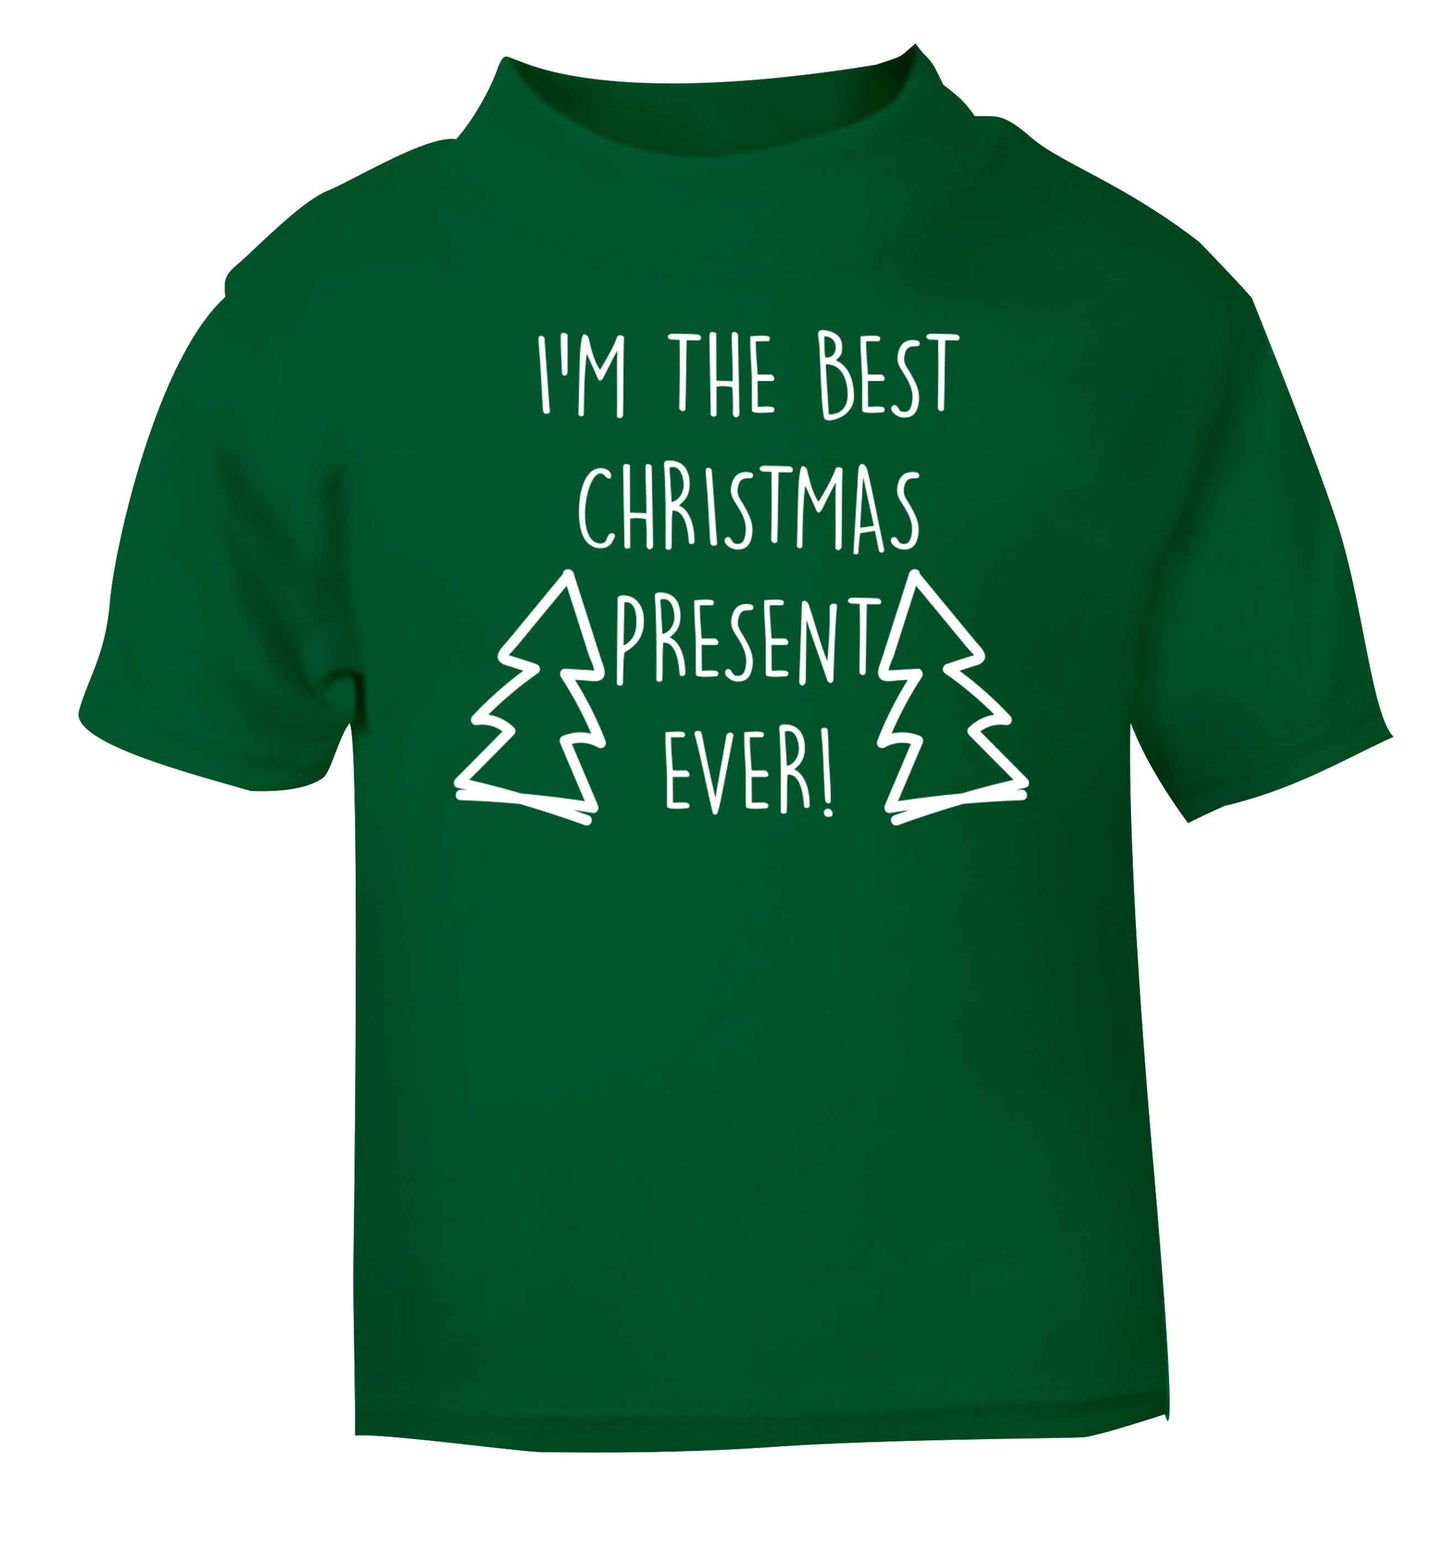 I'm the best Christmas present ever green baby toddler Tshirt 2 Years